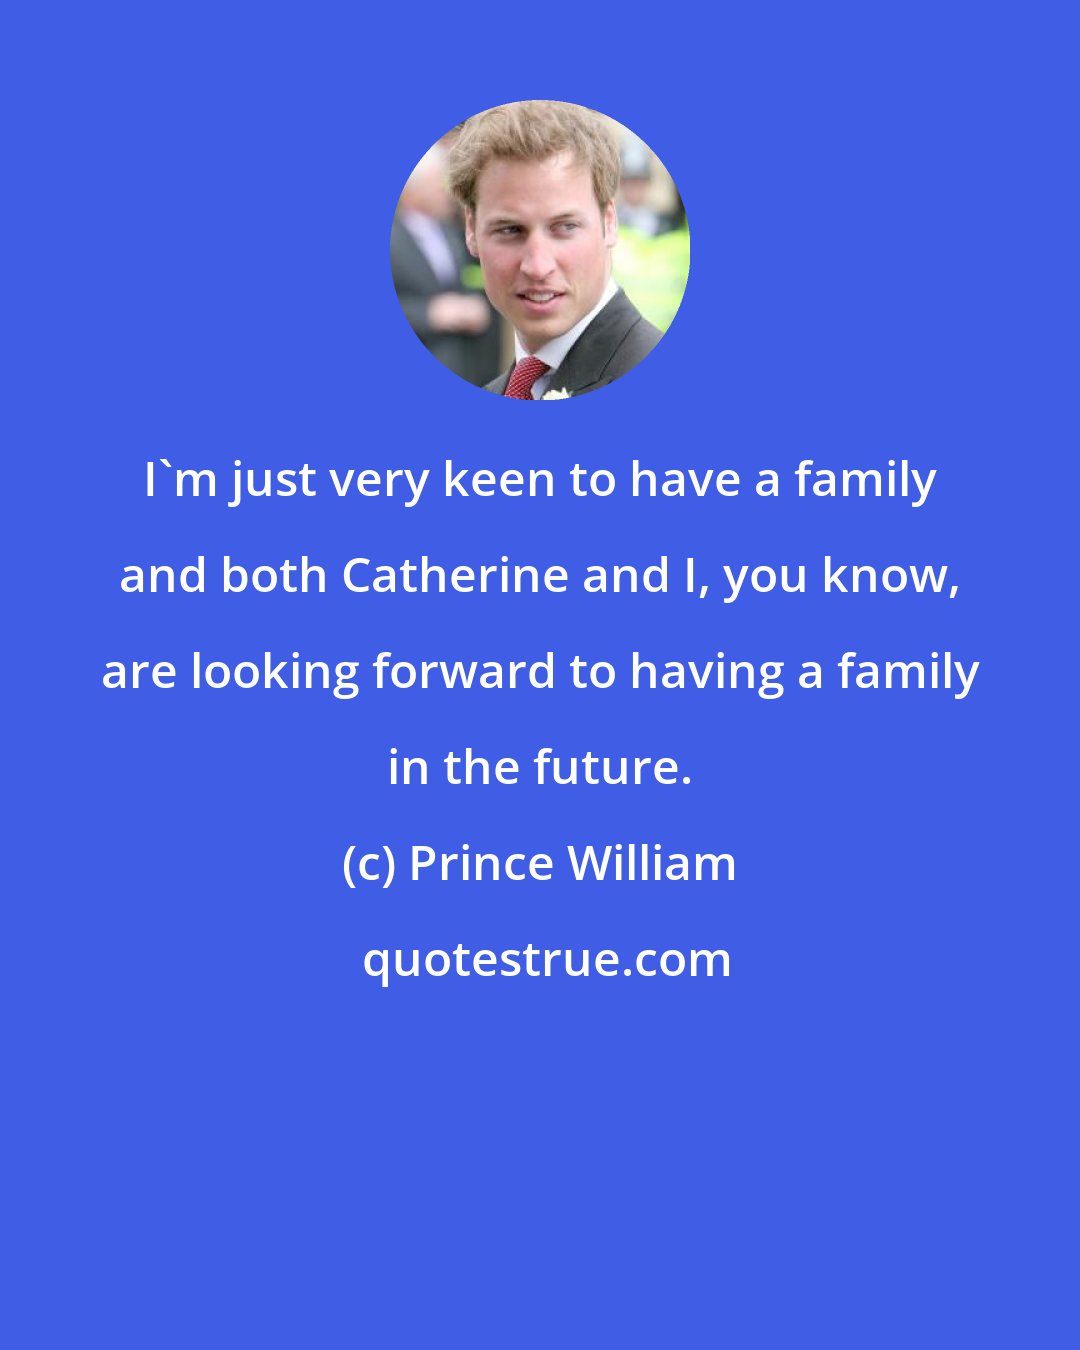 Prince William: I'm just very keen to have a family and both Catherine and I, you know, are looking forward to having a family in the future.